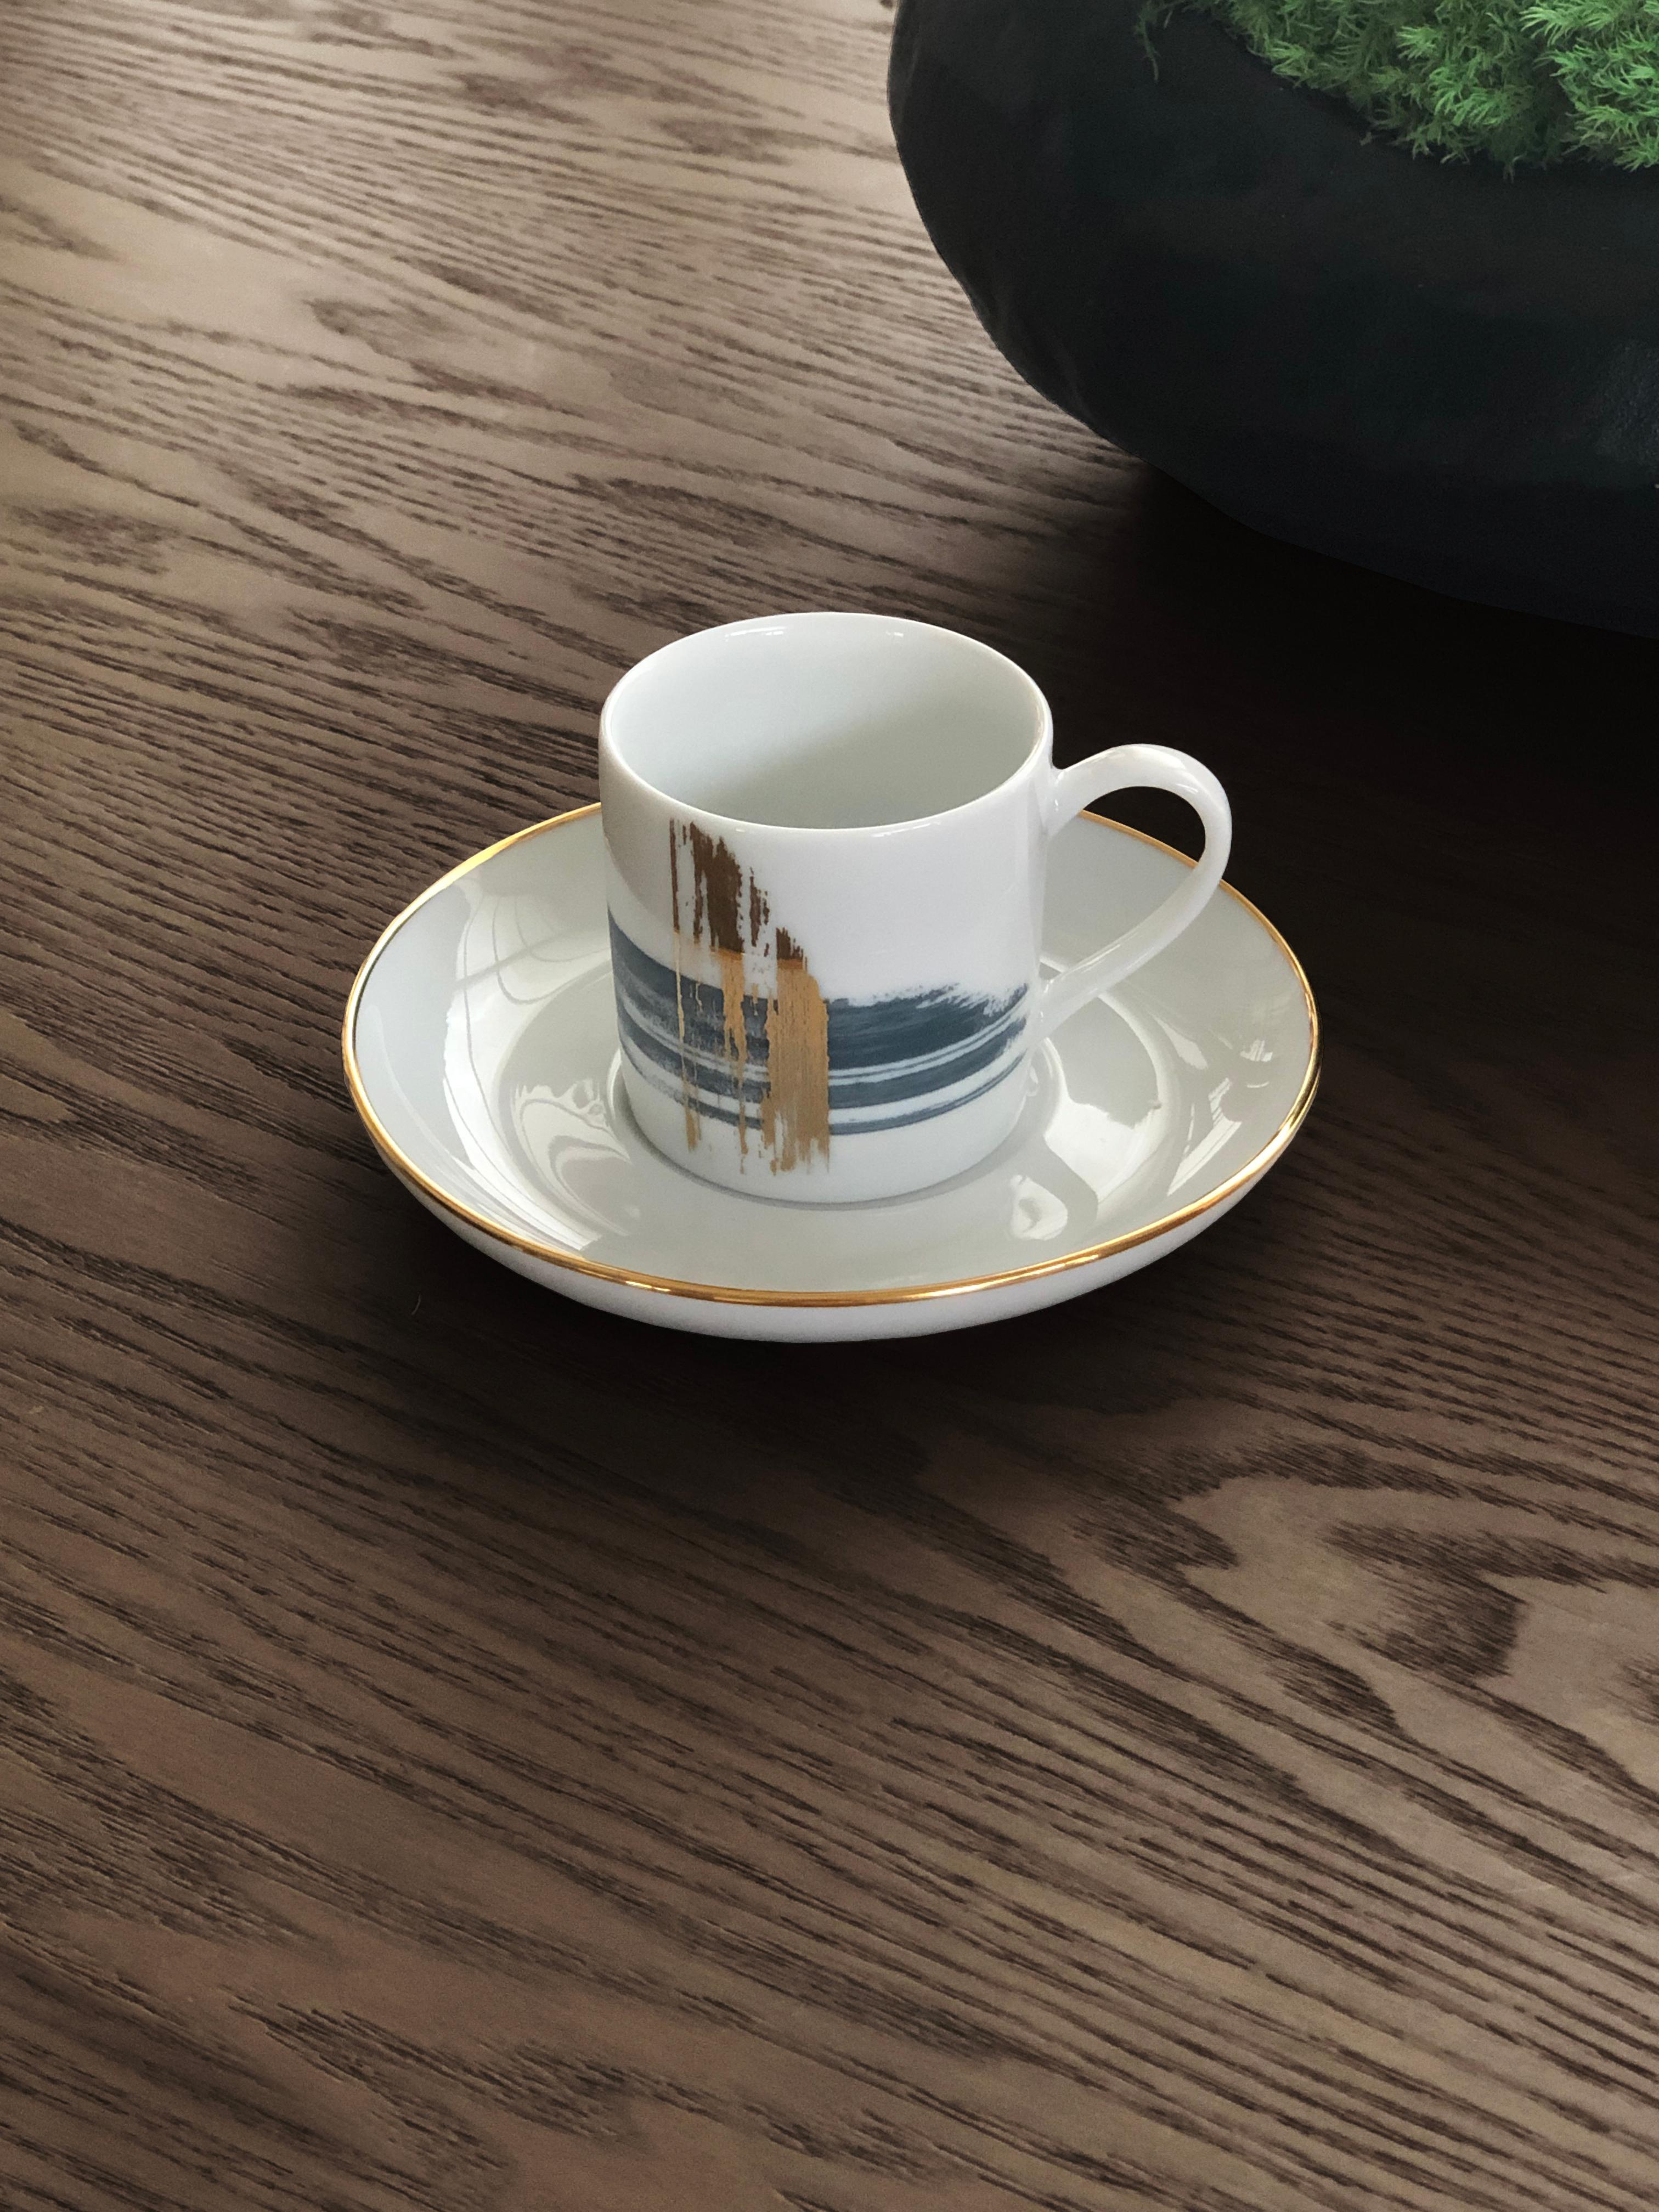 Larger quantities available upon request, with 8 weeks production time.

Description: Coffee cup with saucer (2 pieces)
Color: Blue and gold
Size: 5.5Ø x 5.5H cm, 80 ml
Material: Porcelain and gold
Collection: Artisan Brush